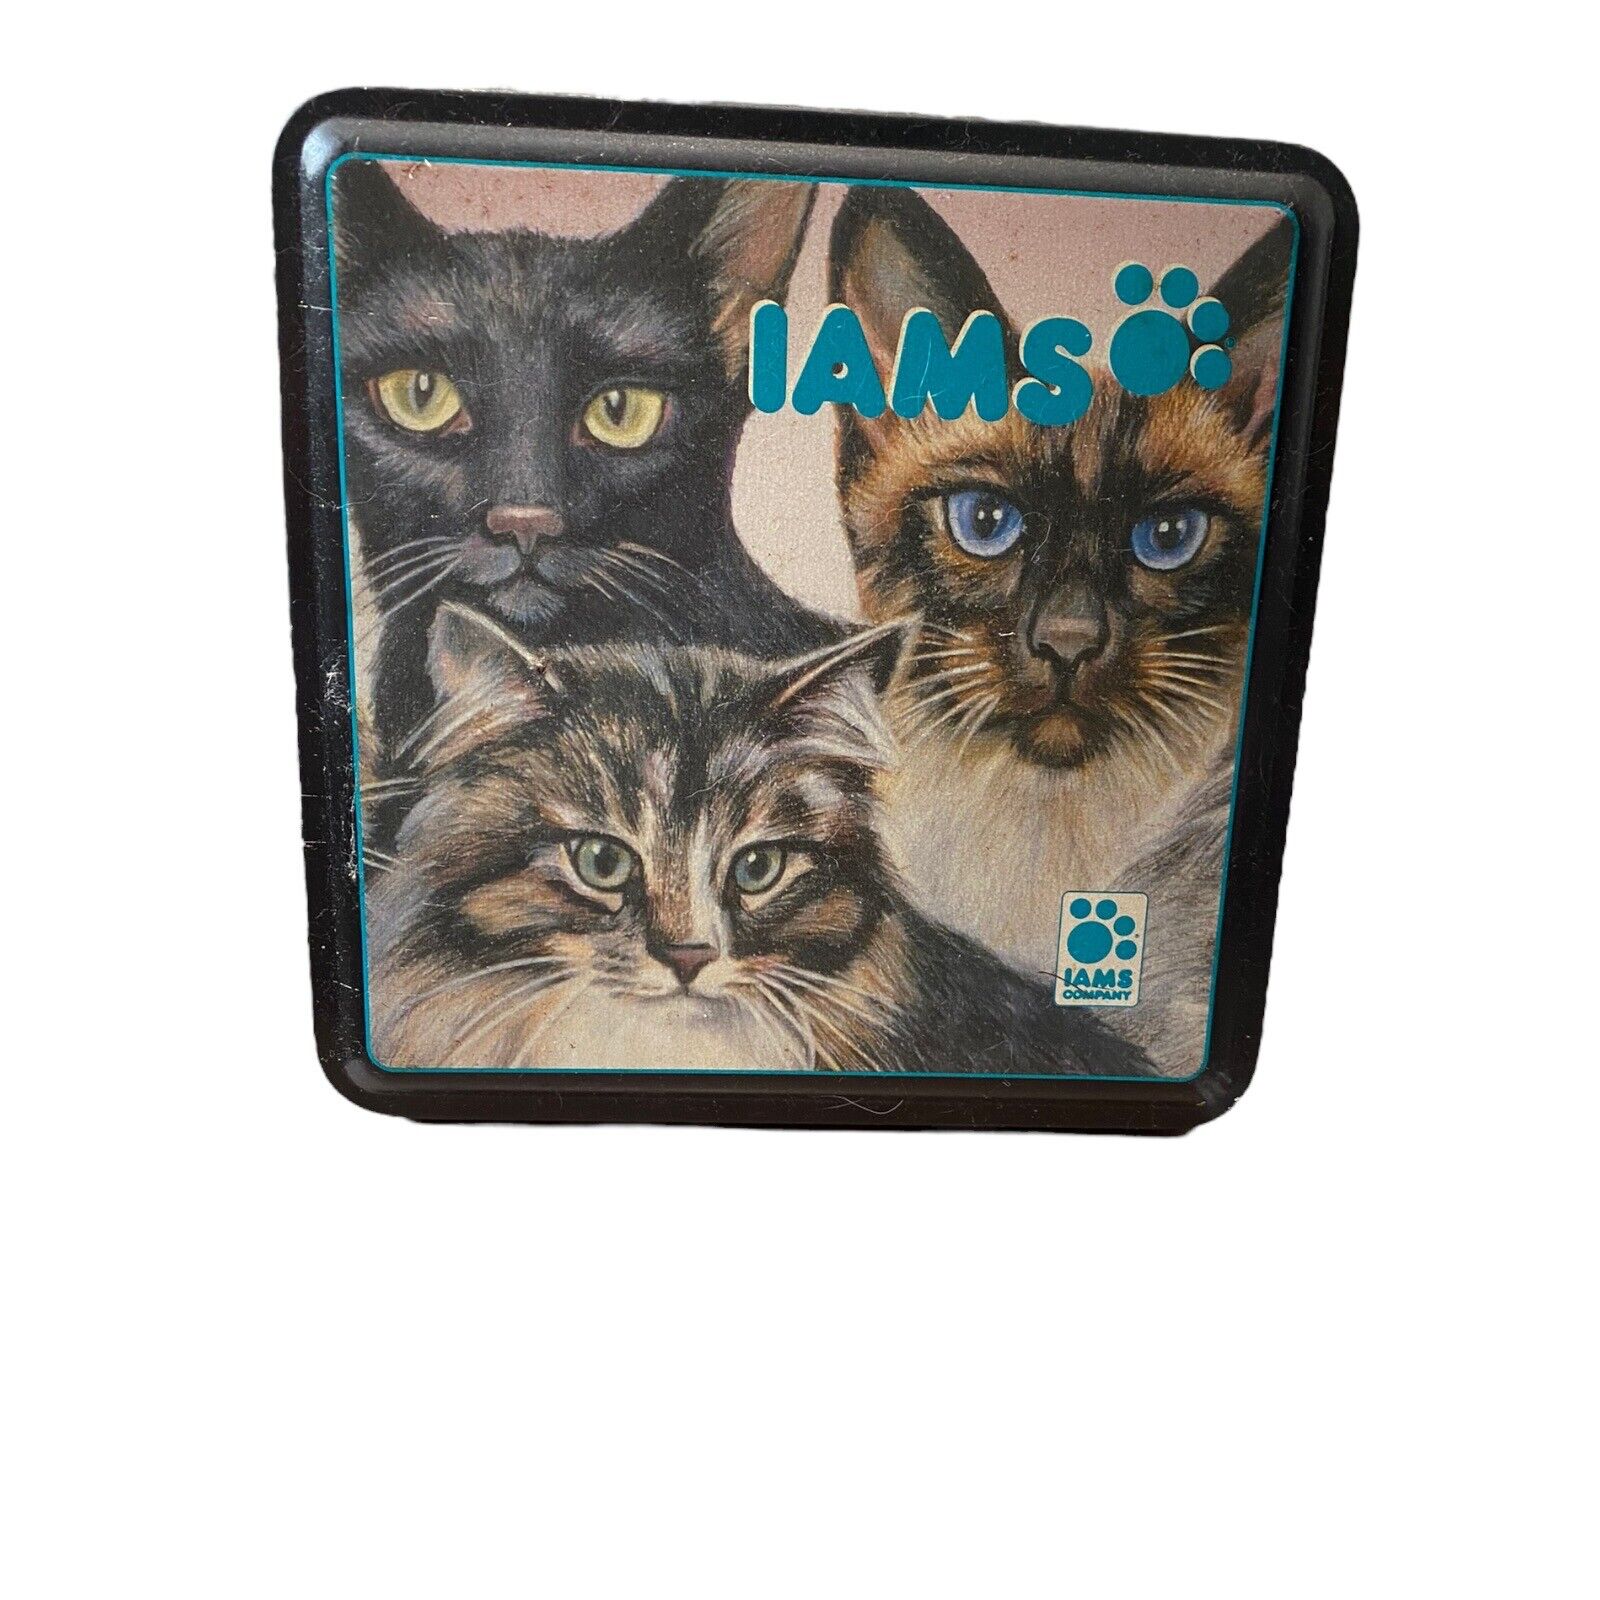 VTG 1990s IAMS Cats Metal Cat Food Collector’s Tin Canister Food Storage 6” X 6”